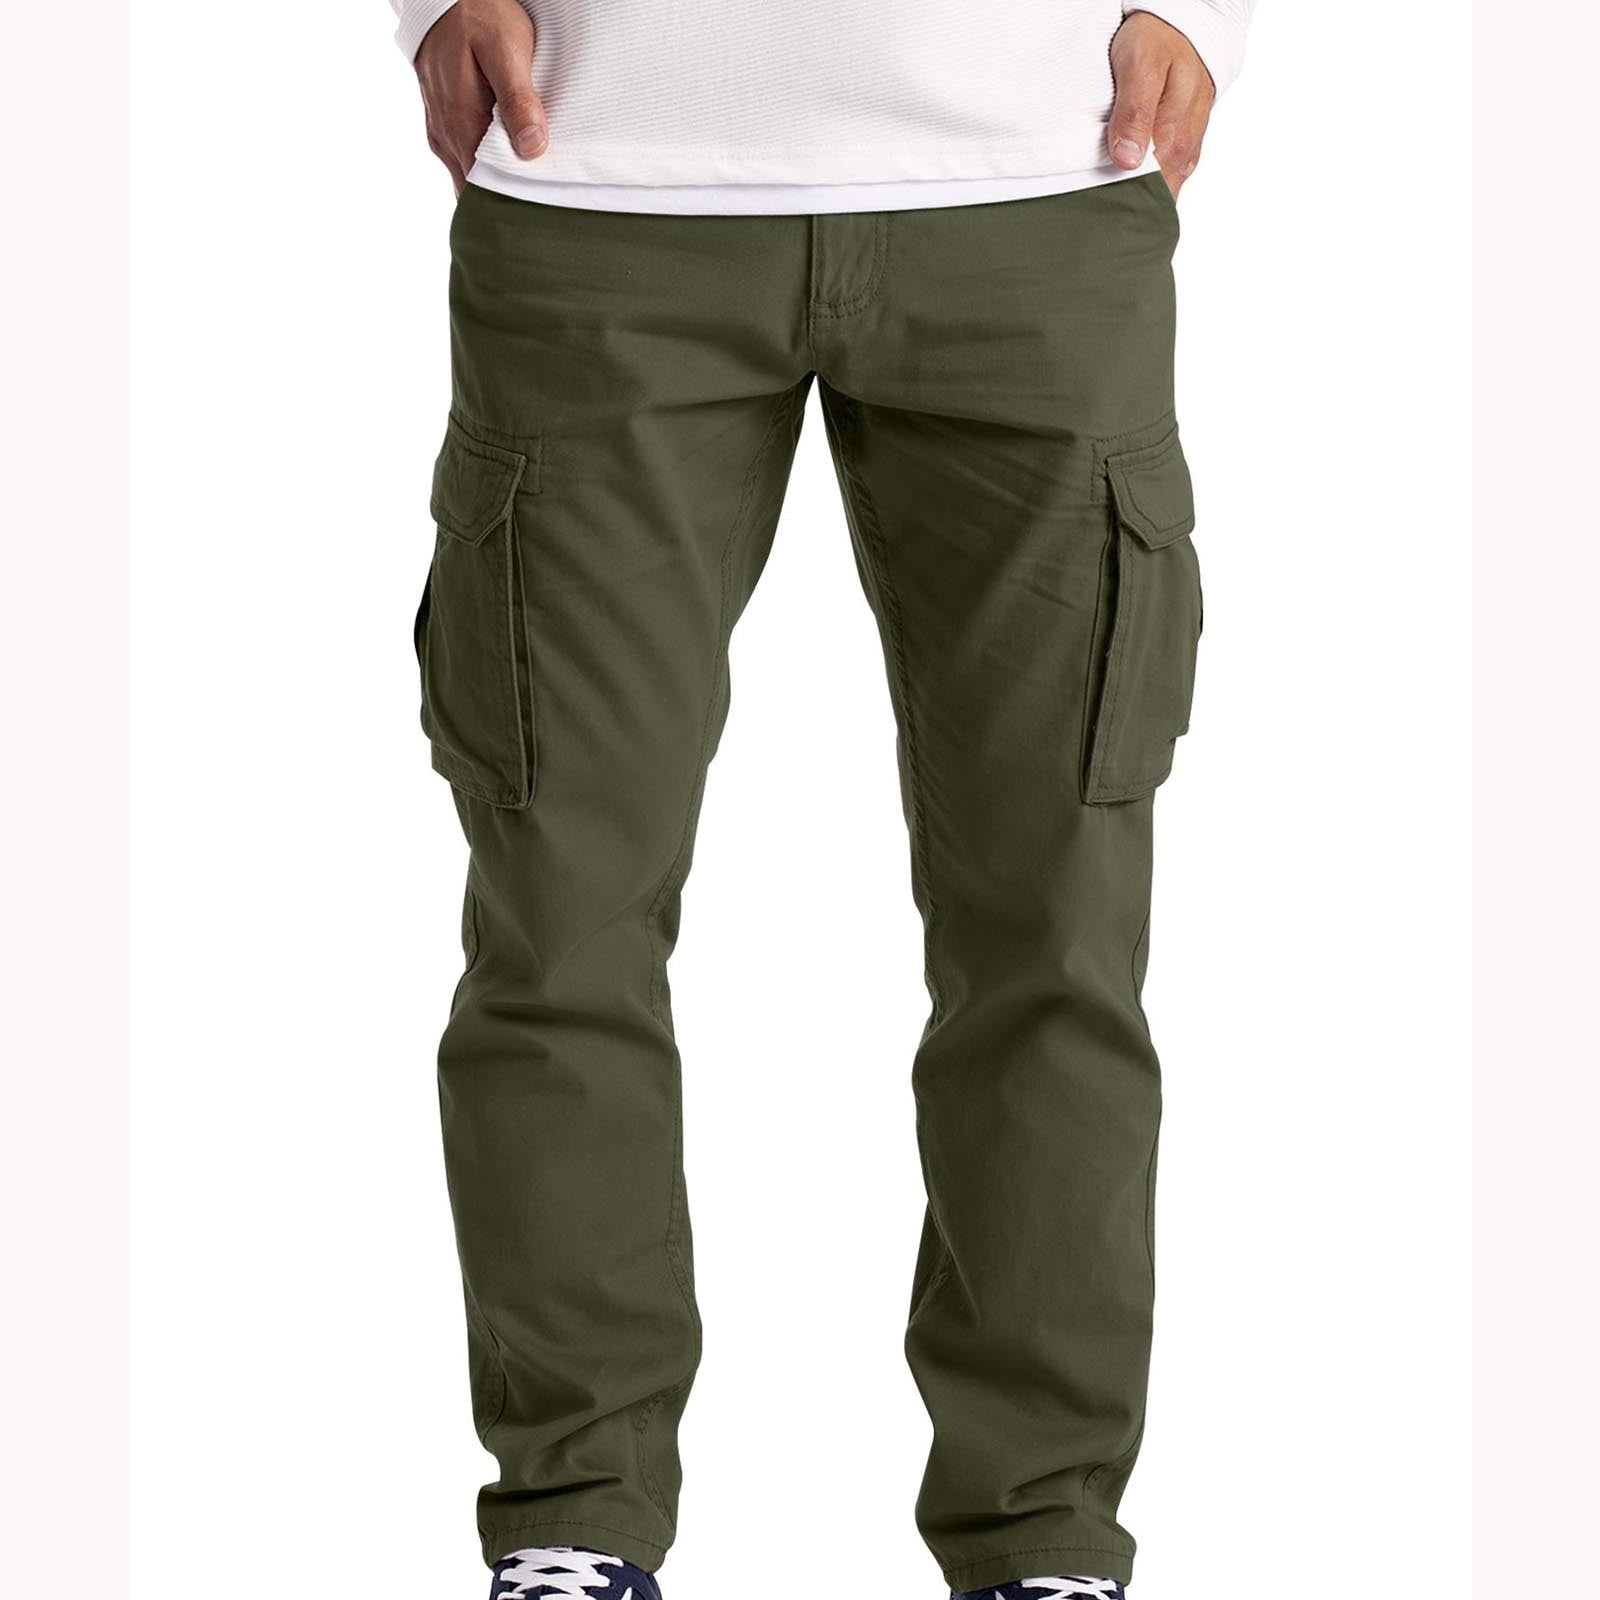 Aoochasliy Mens Jeans Clearance Reduced Price Men's Cargo Trousers Work ...